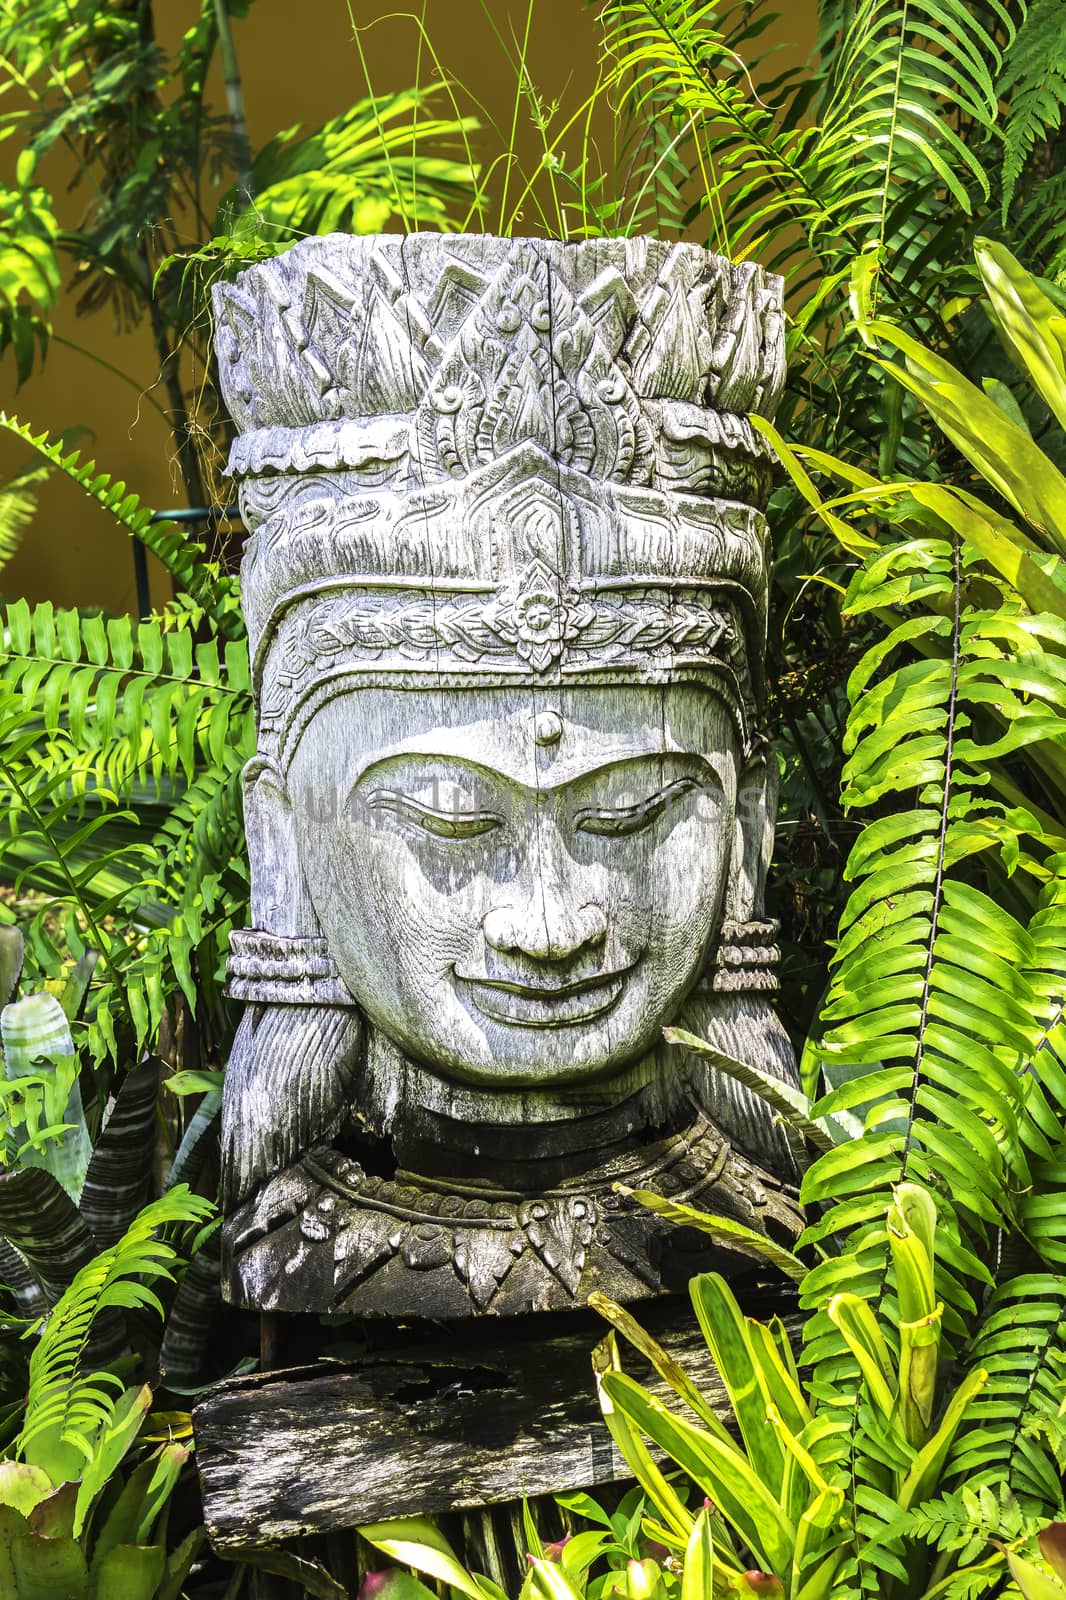 Wooden carving decorated with green plant in the garden